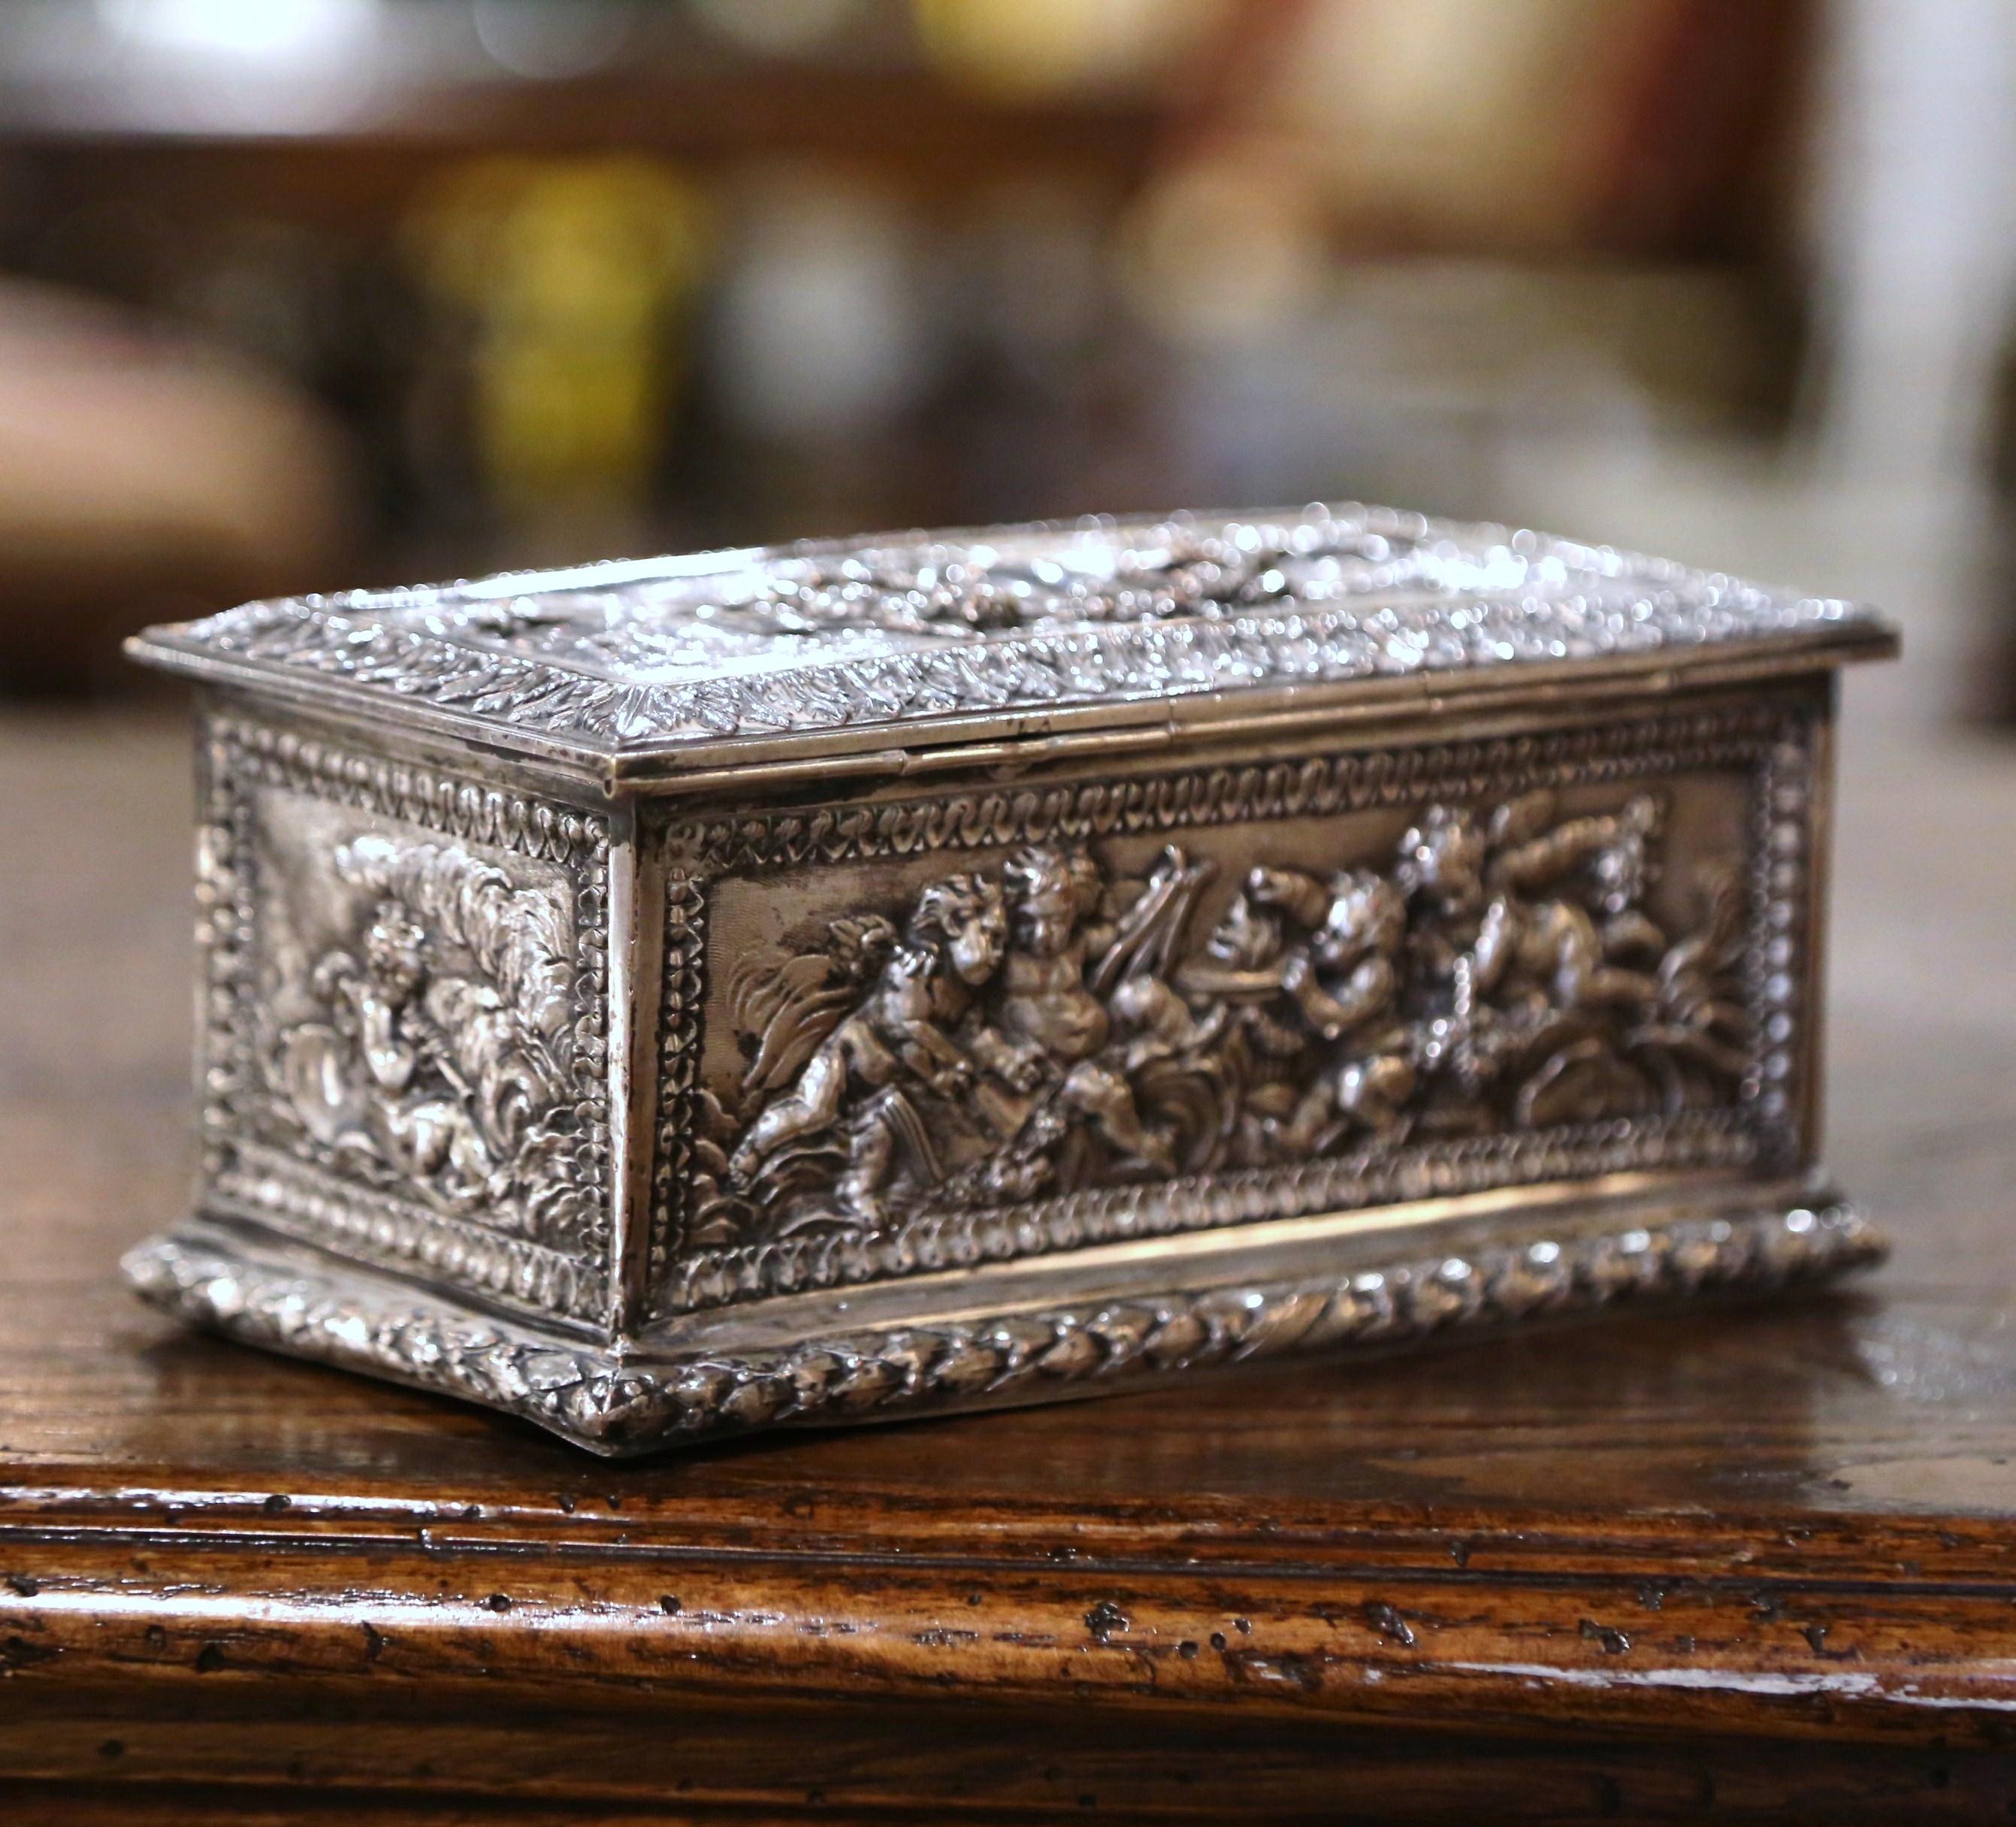 Place this elegant, antique Napoleon III copper box in your master bath to keep your jewelry safe and organized. Crafted in France circa 1880, the ornate casket is rectangular in shape; all five sides including the top are decorated with detailed